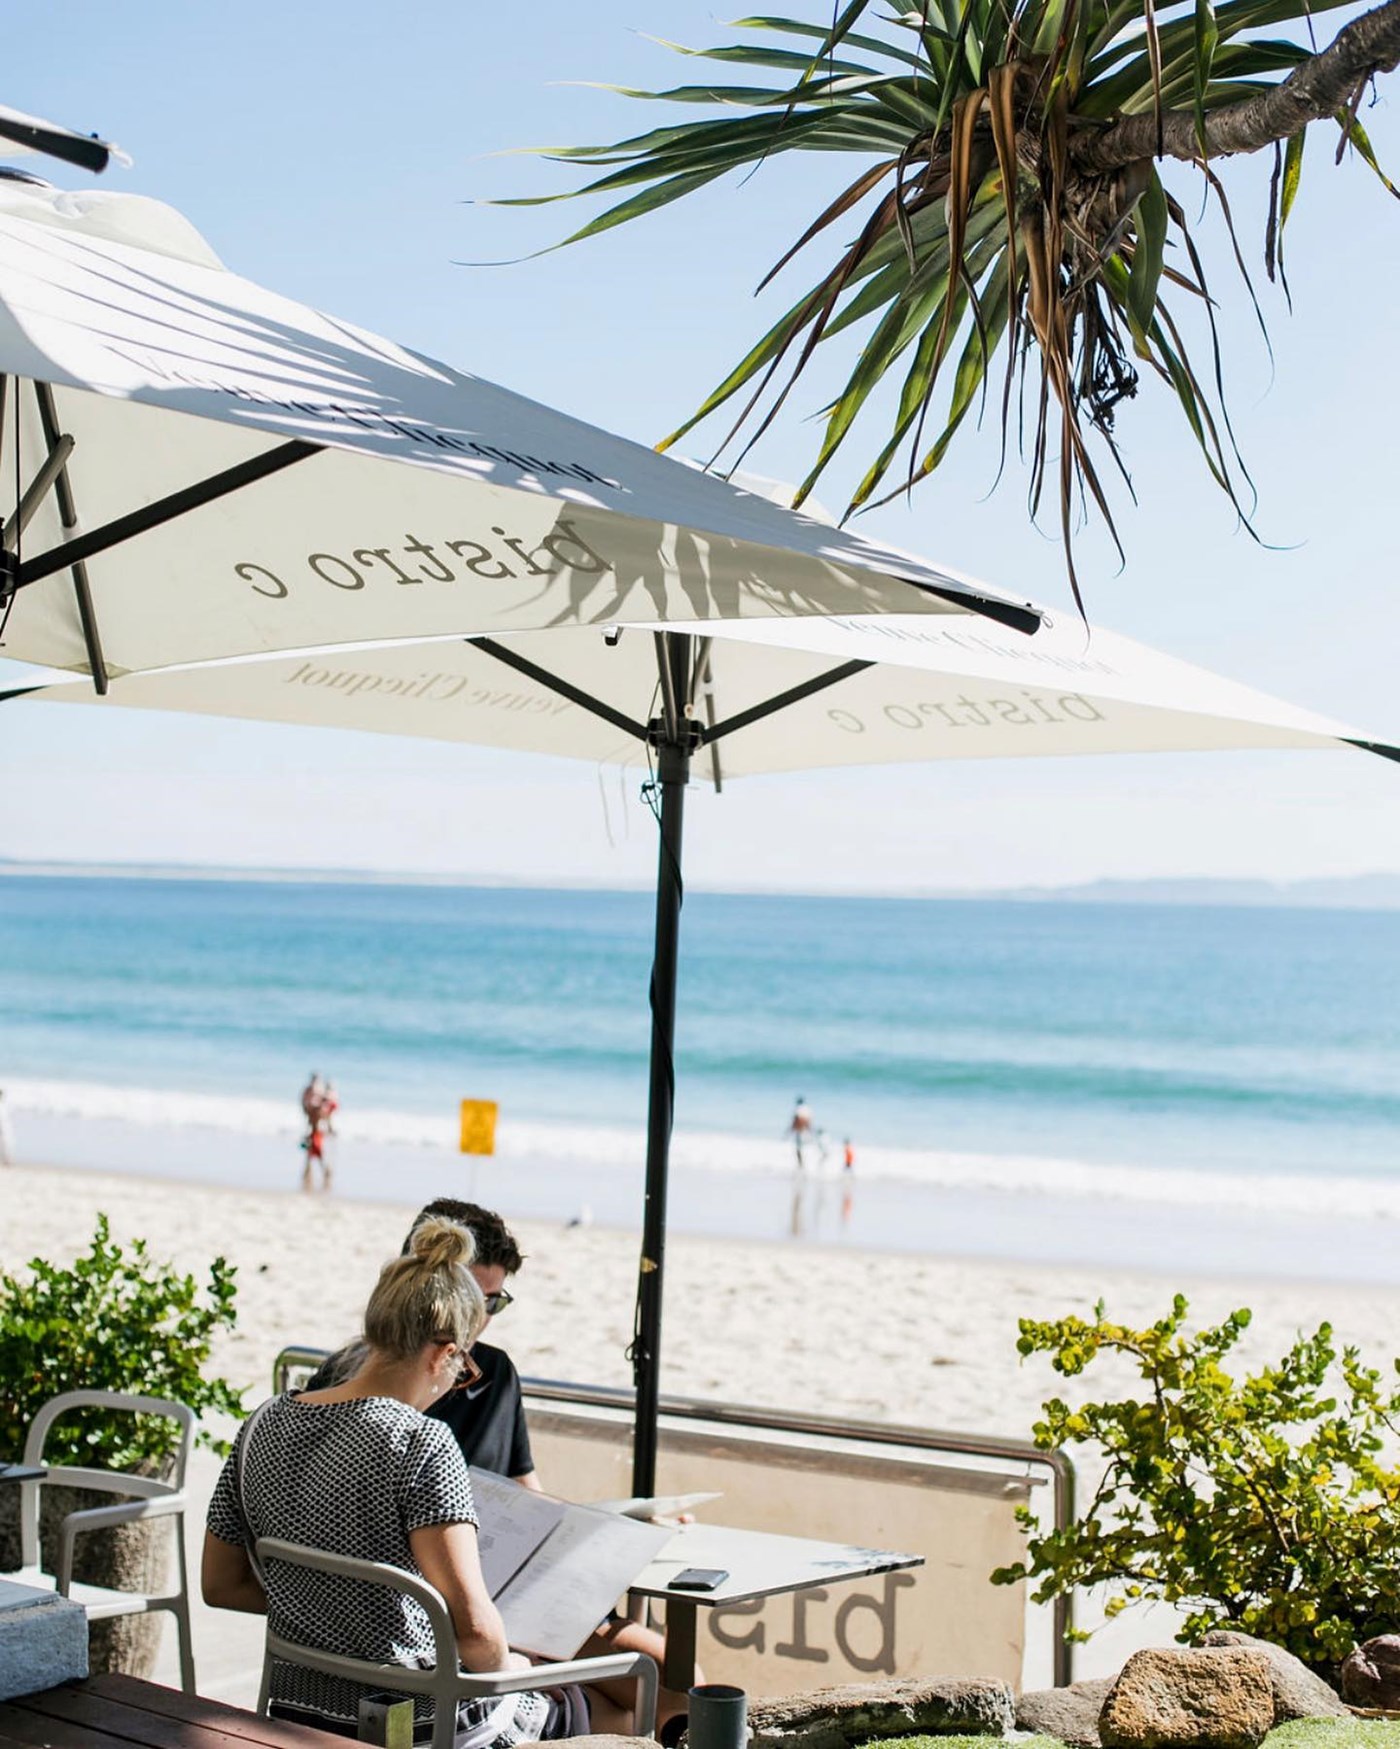 Two people seated at a table under an umbrella are reading the menu, the beach is in the background